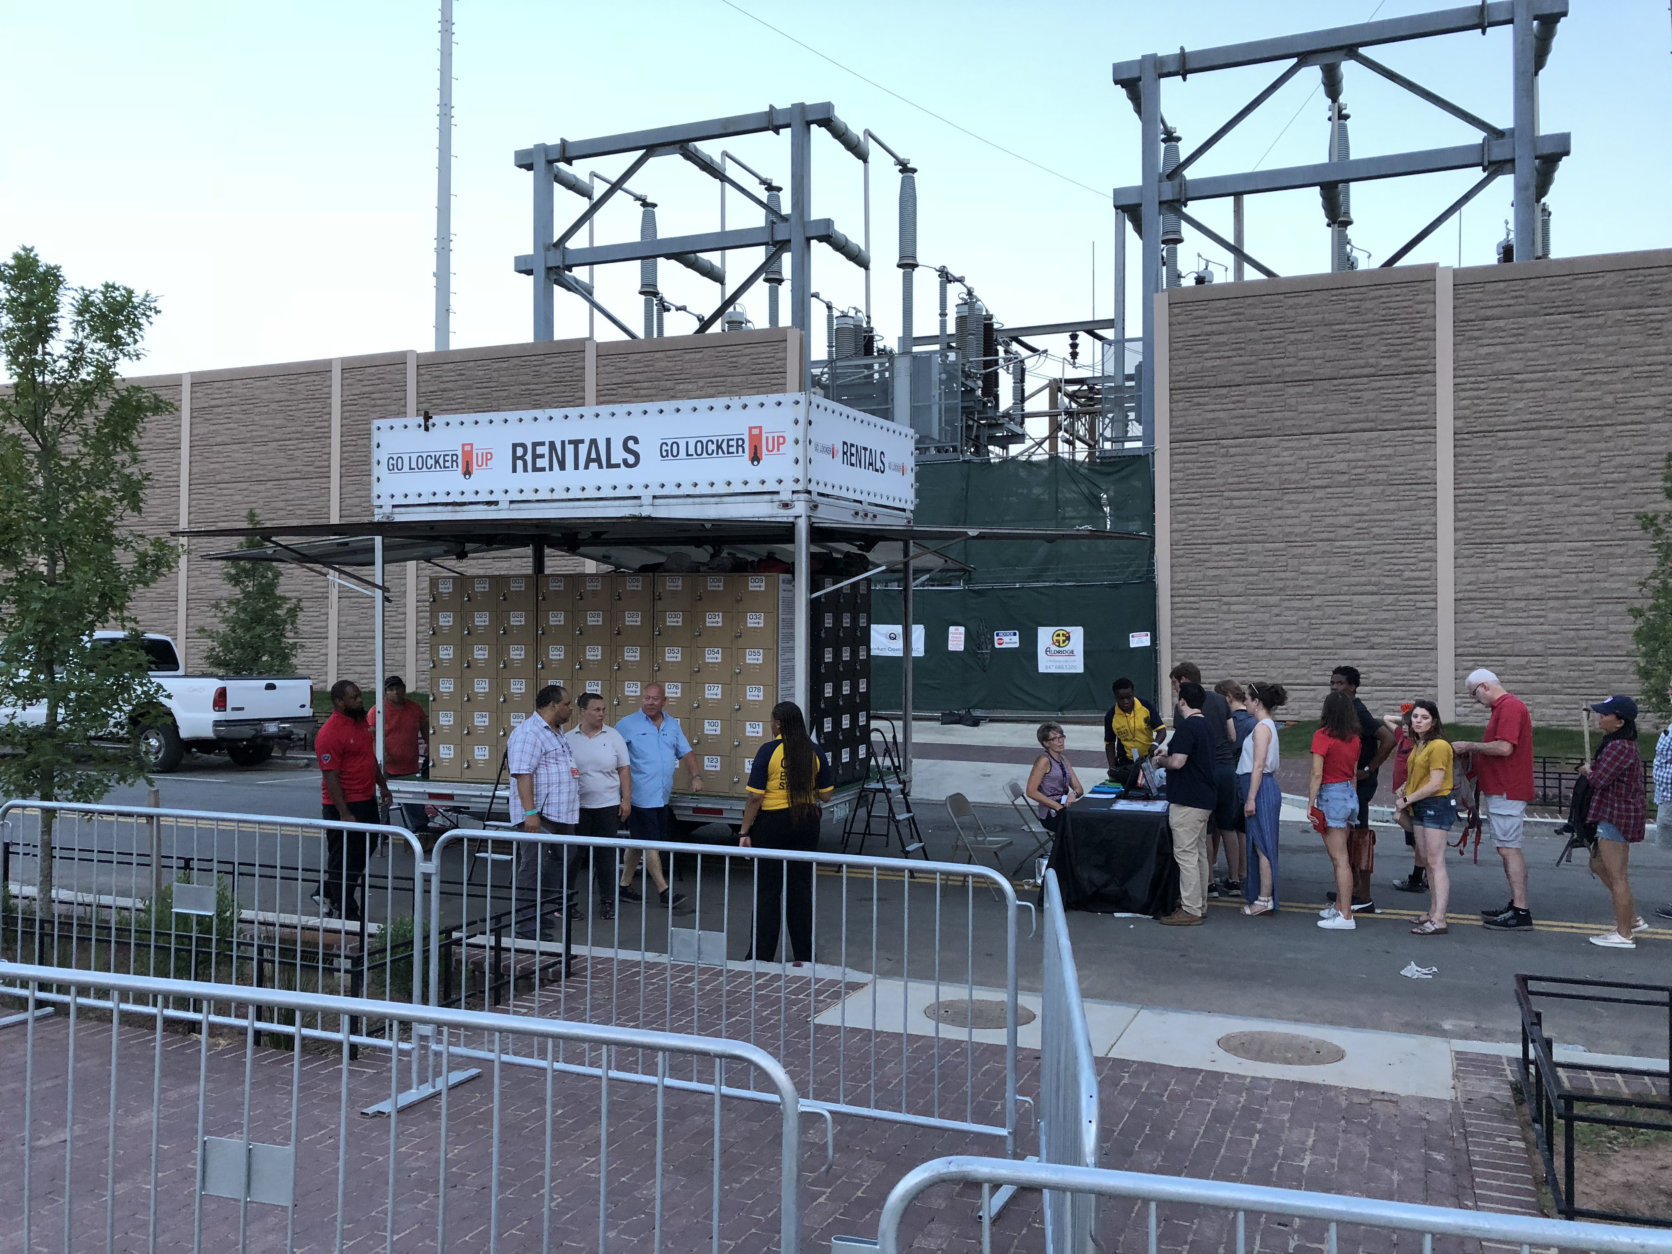 Sets of lockers are on hand at Audi Field during a D.C. United Game on Saturday, July 28, 2018, for game attendees to store their belongings. (WTOP/Mike McMearty)